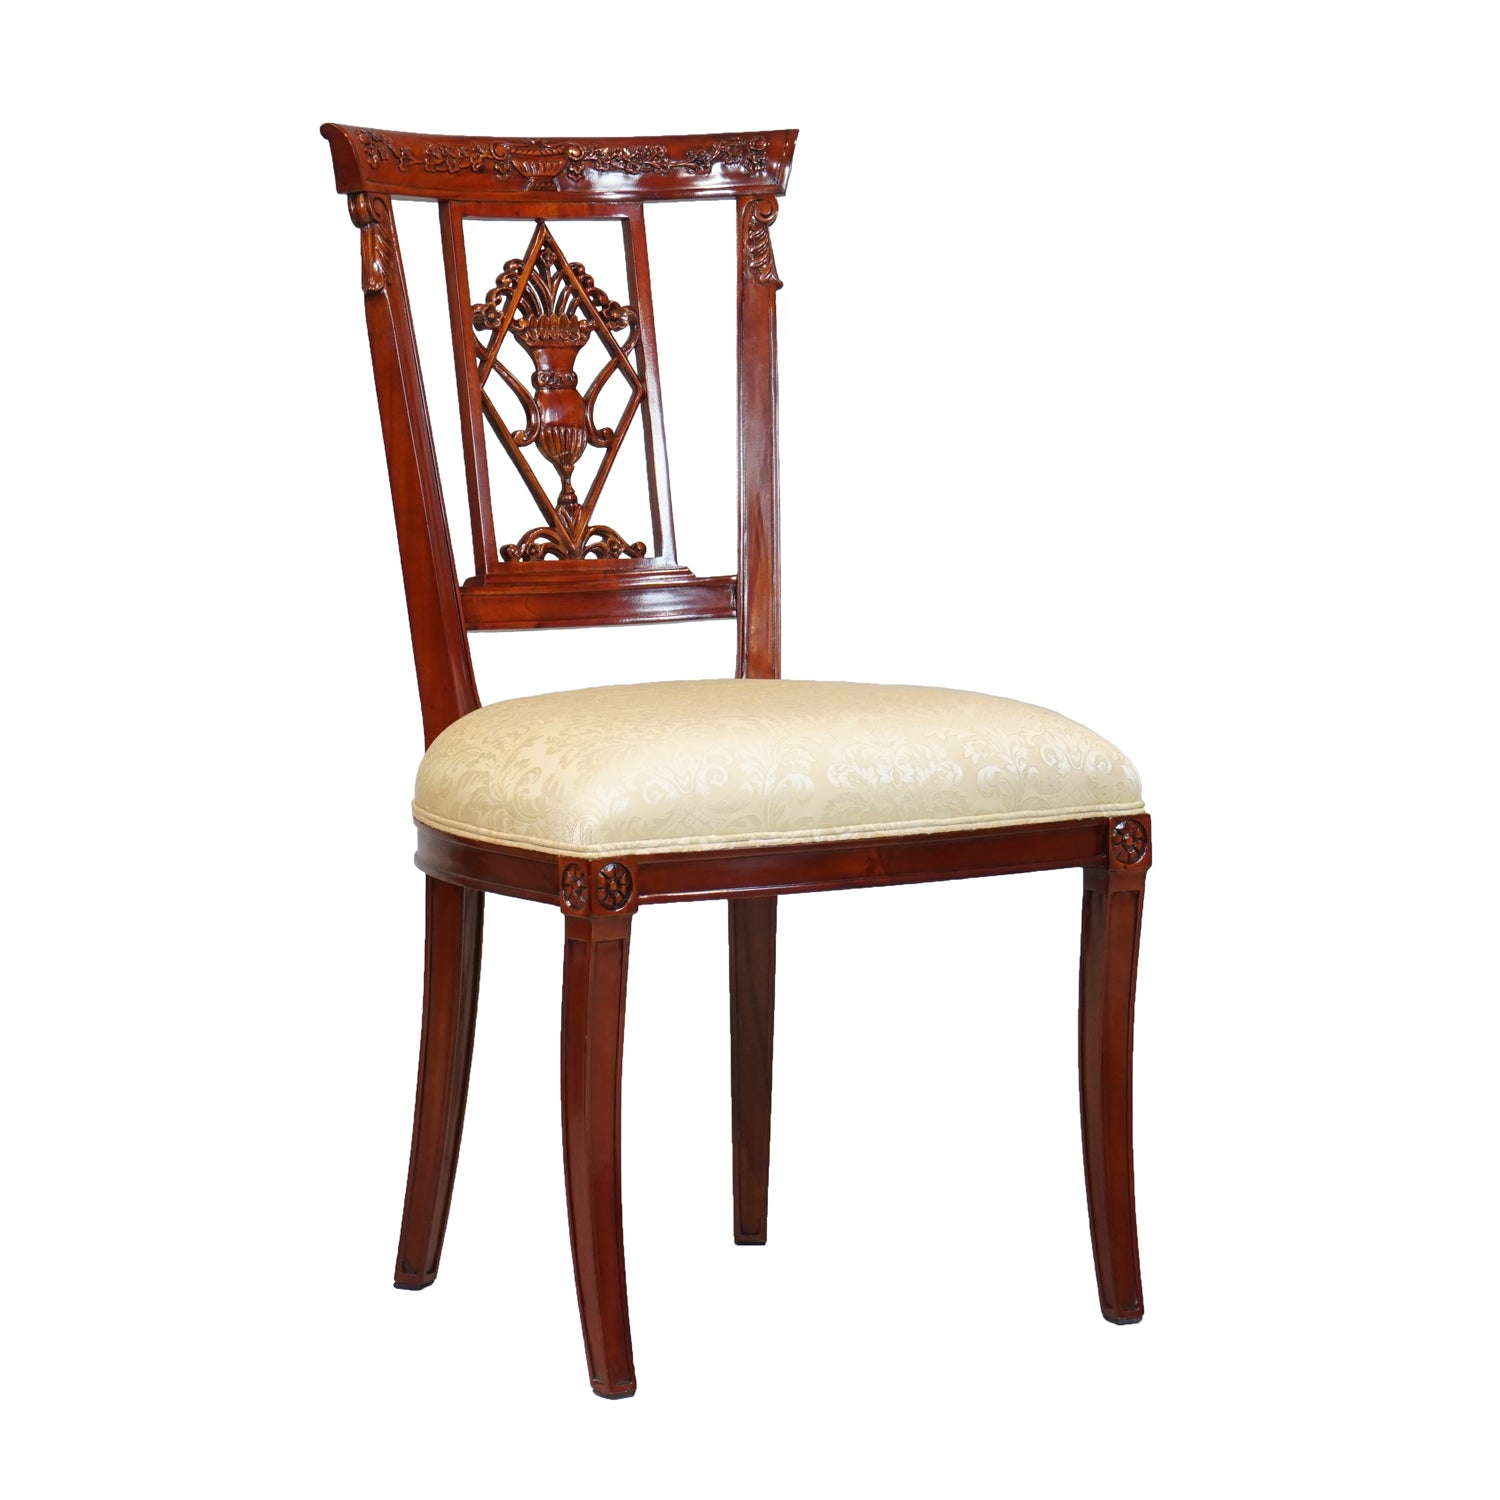 *Deep Carved Side Chair